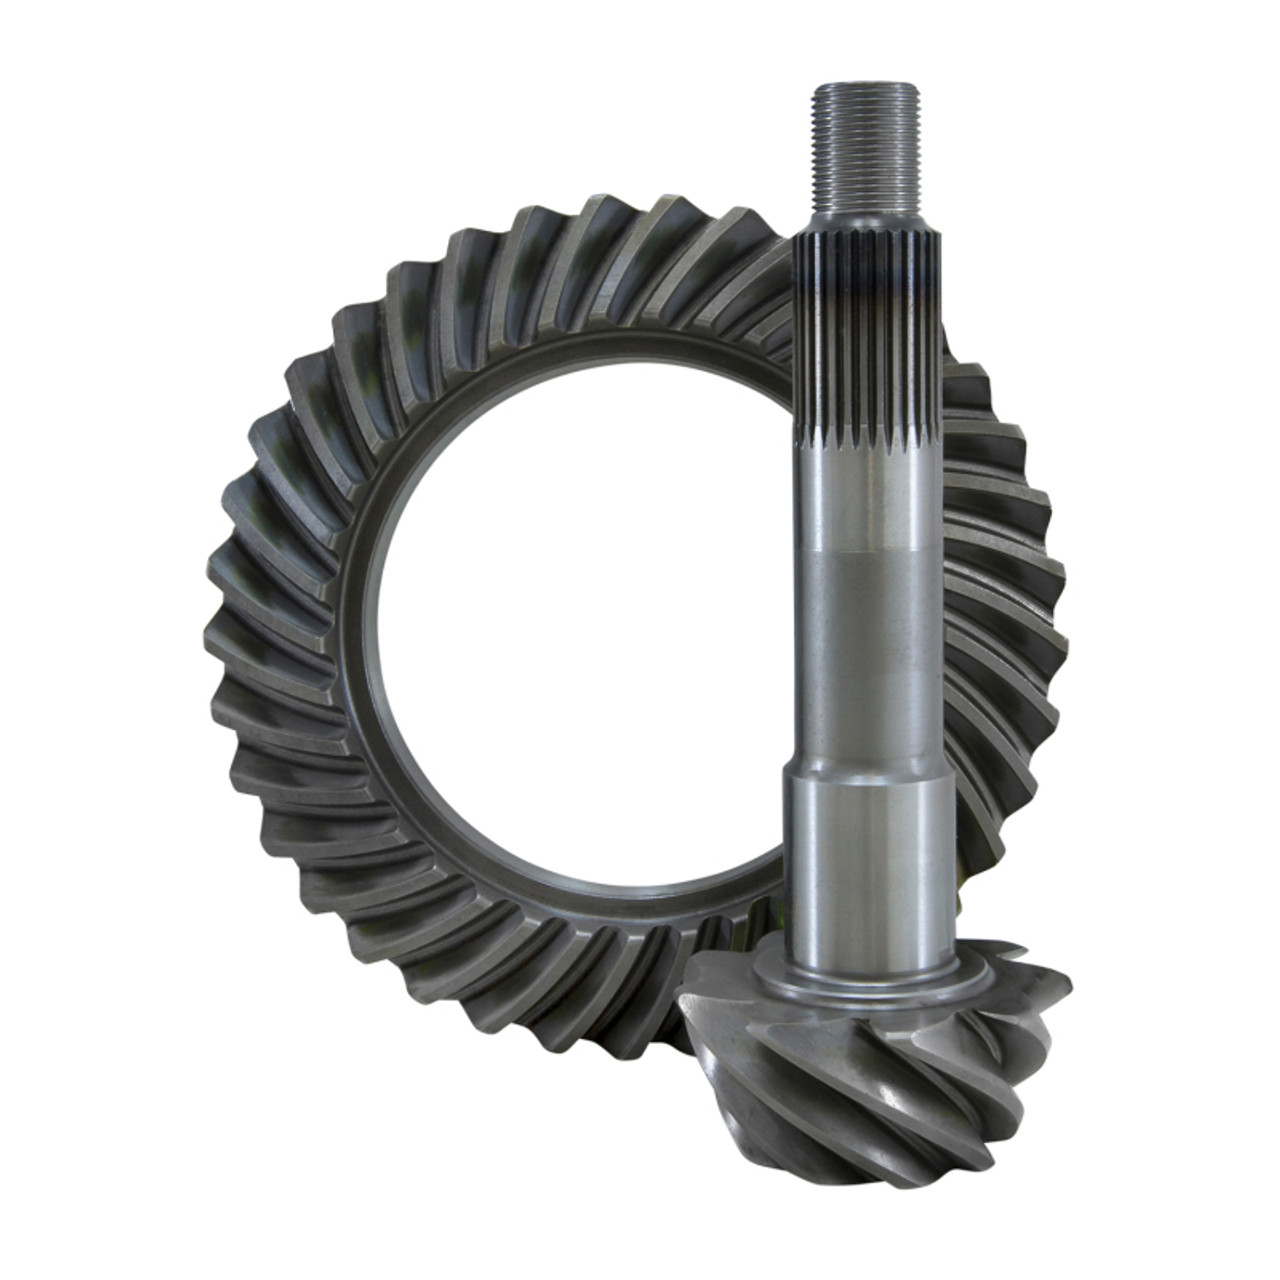 USA Standard Ring & Pinion Gear Set For Toyota 8in in a 4.88 Ratio - ZG T8-488-29 Photo - Primary